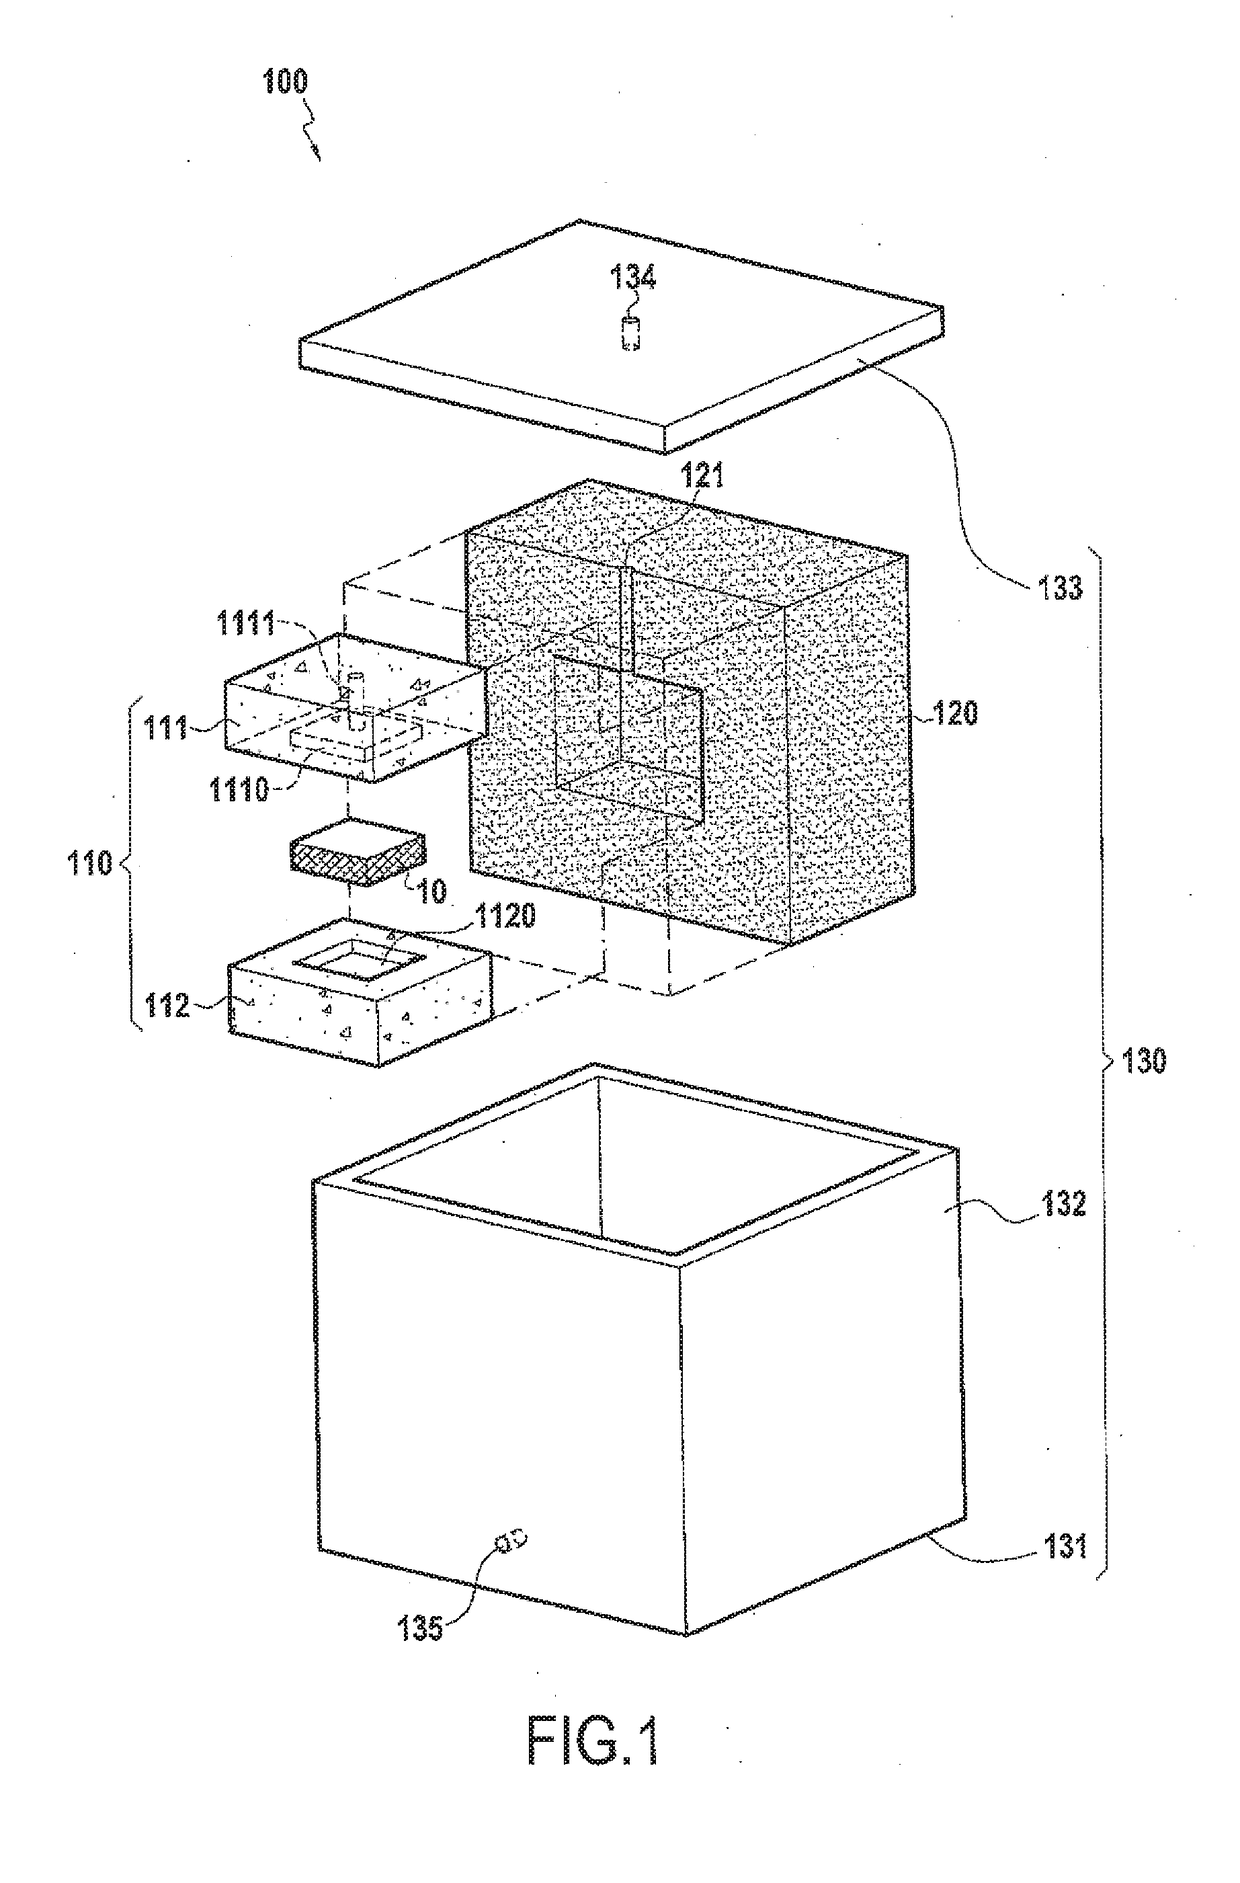 Process for manufacturing a ceramic composite material part by pressurized injection of a loaded slurry into a porous mould